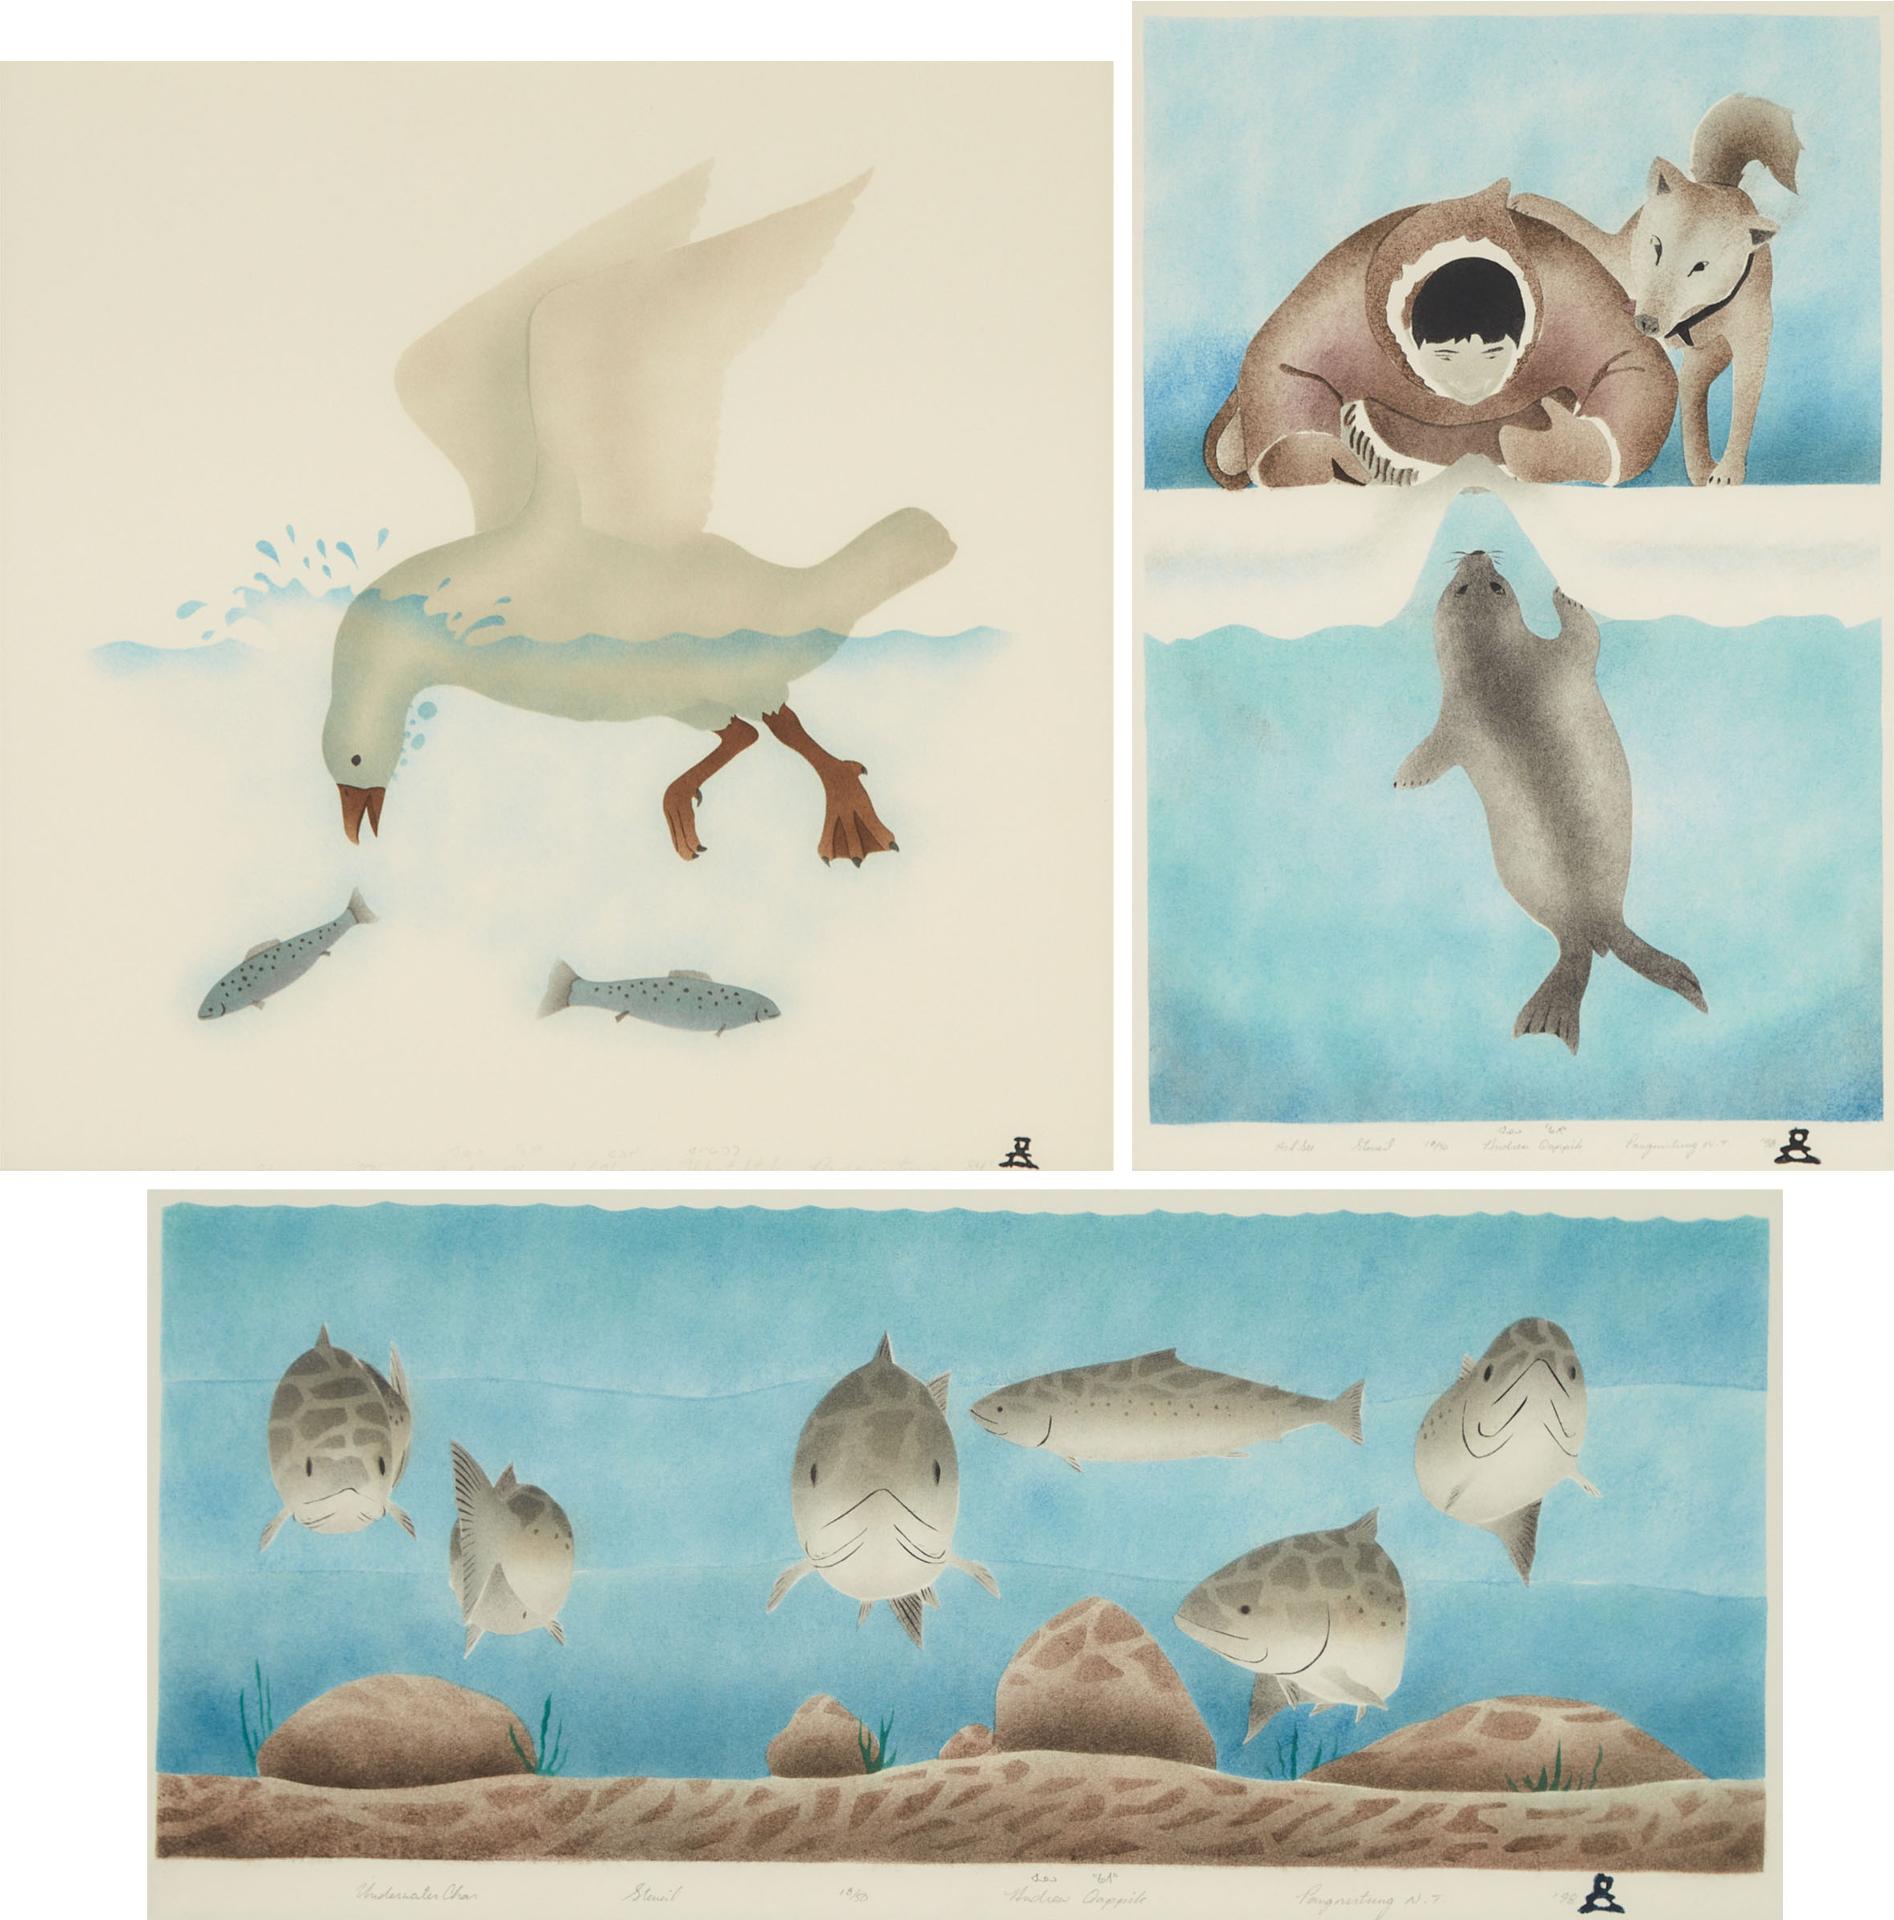 Andrew Qappik (1964) - Underwater Char, 1998; As I See, 1998; Diving For Fish, 1984